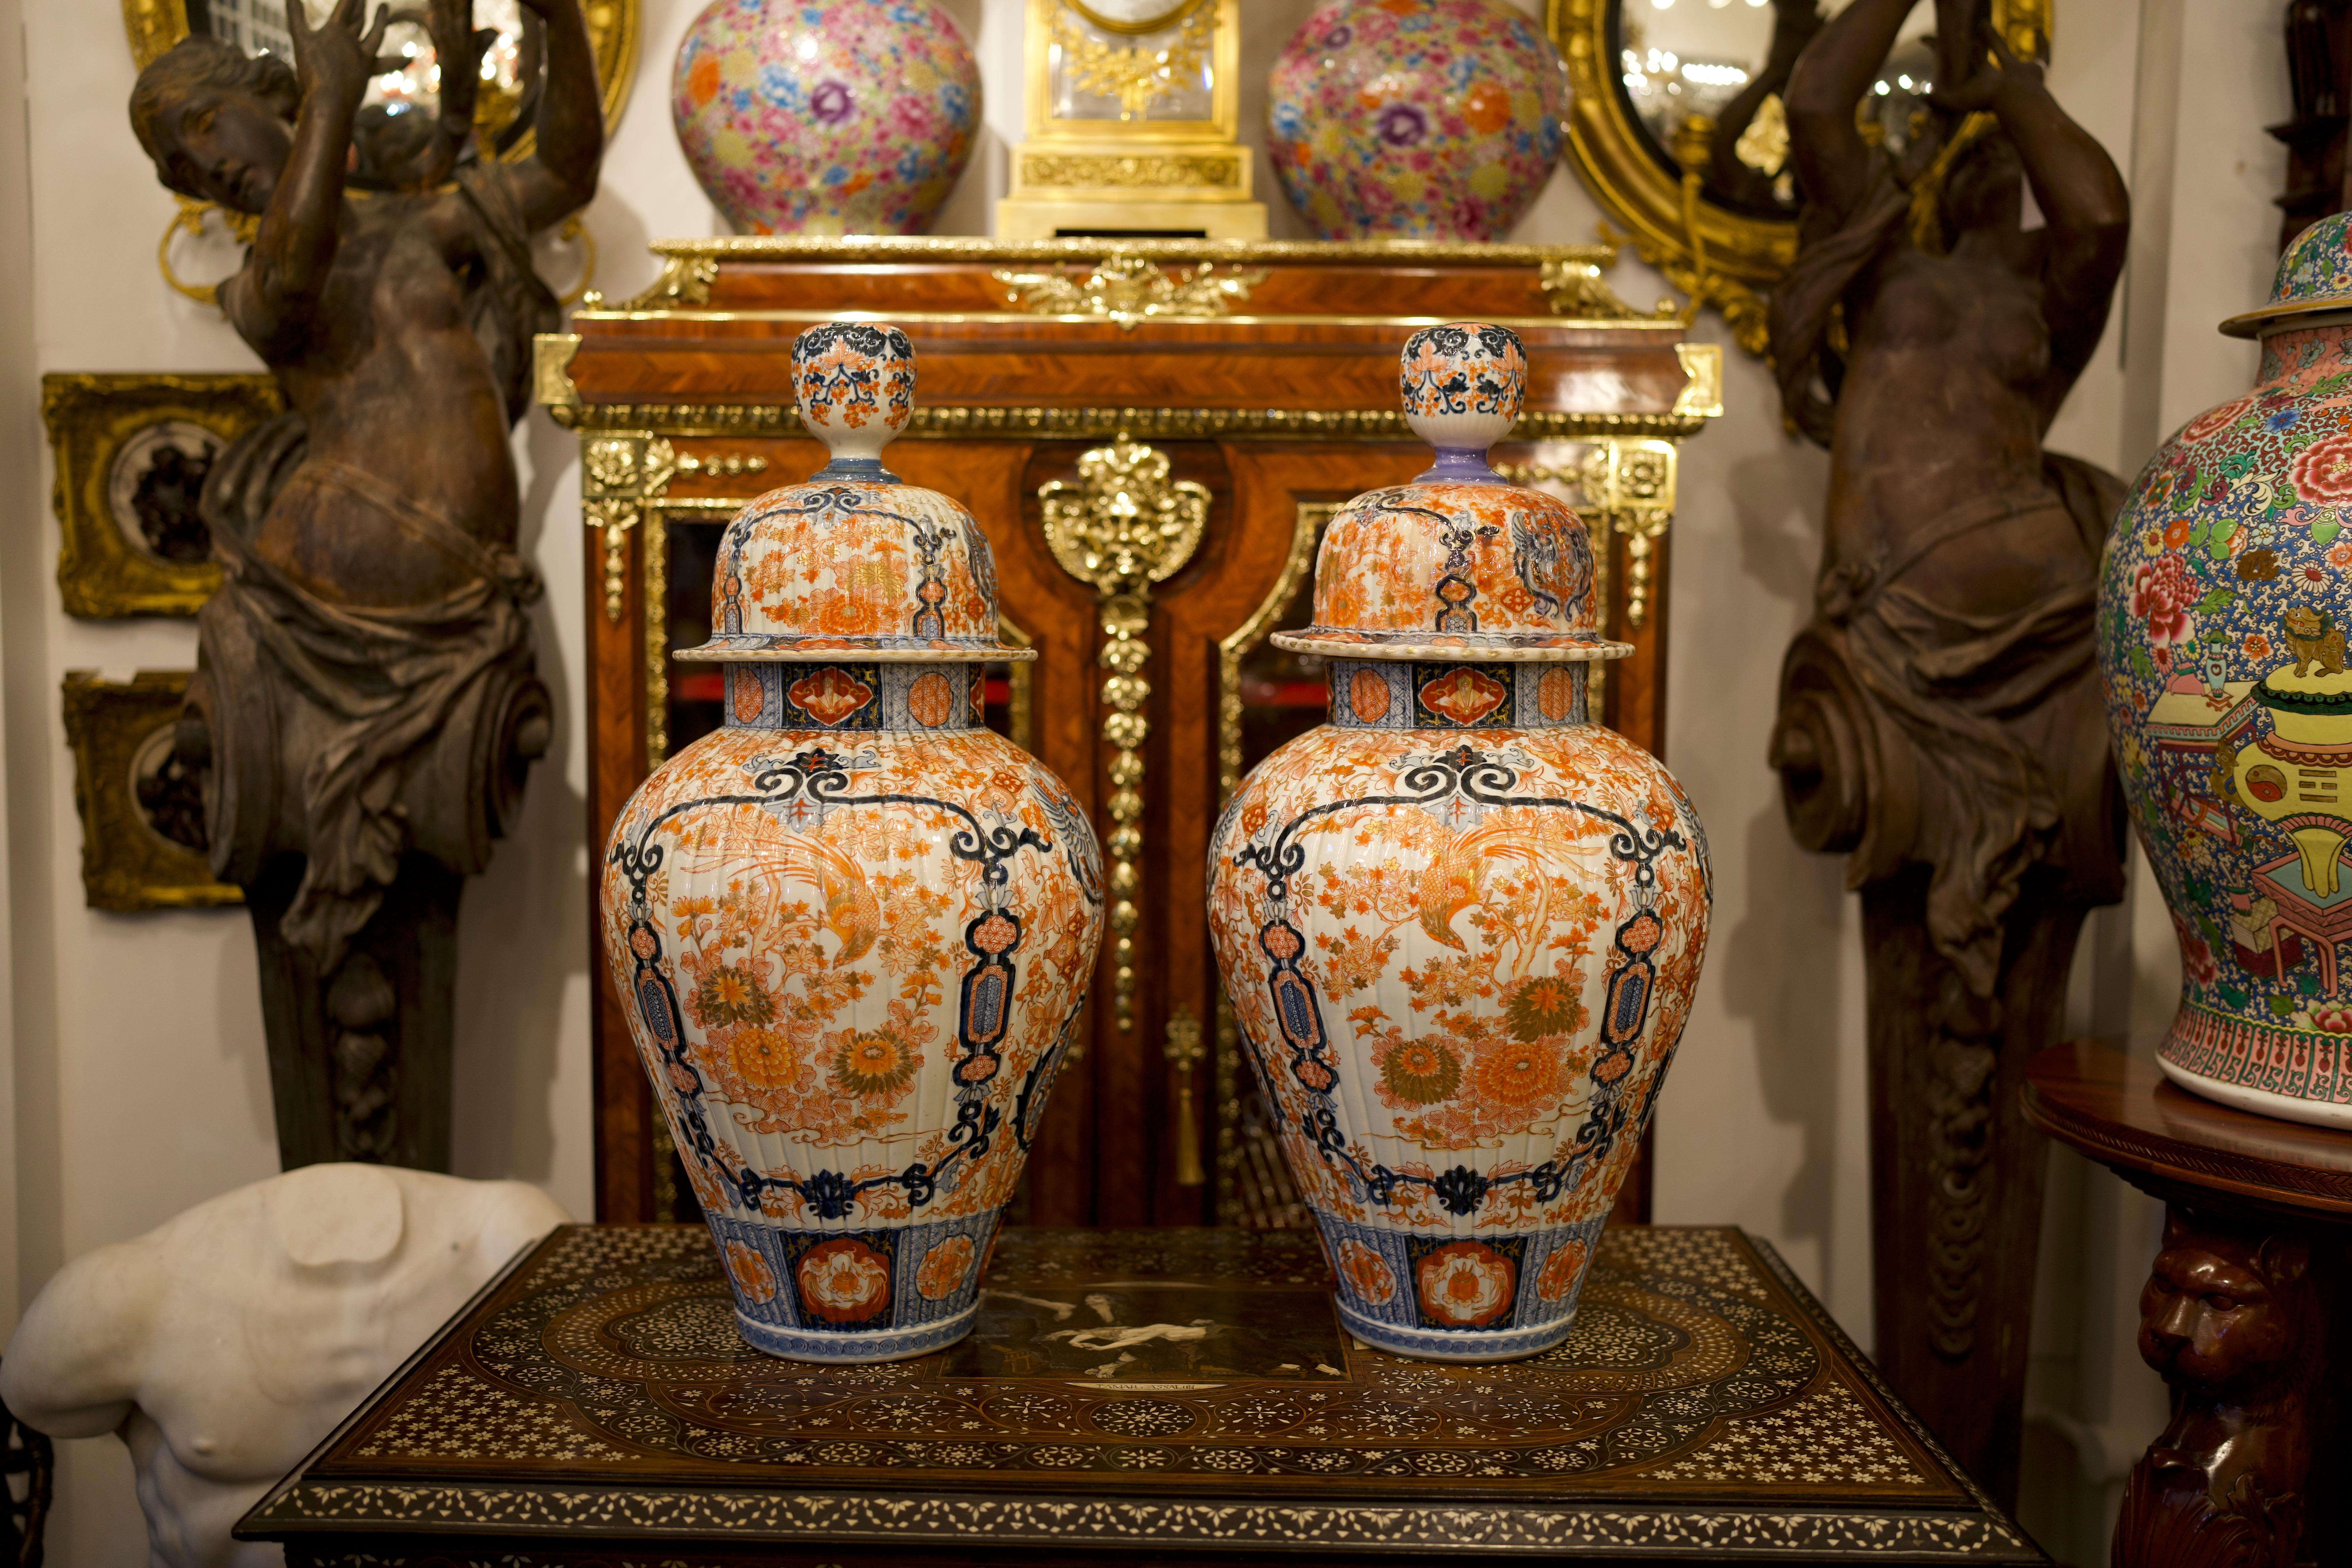 A beautiful 19th century Pair of Japanese Imari Lidded Ginger Jars/Vases.

This highly decorative and fine pair of Japanese Imari ginger jars depict a central outdoor ceremonial scene surrounded by colourful geometric and floral patterned designs.